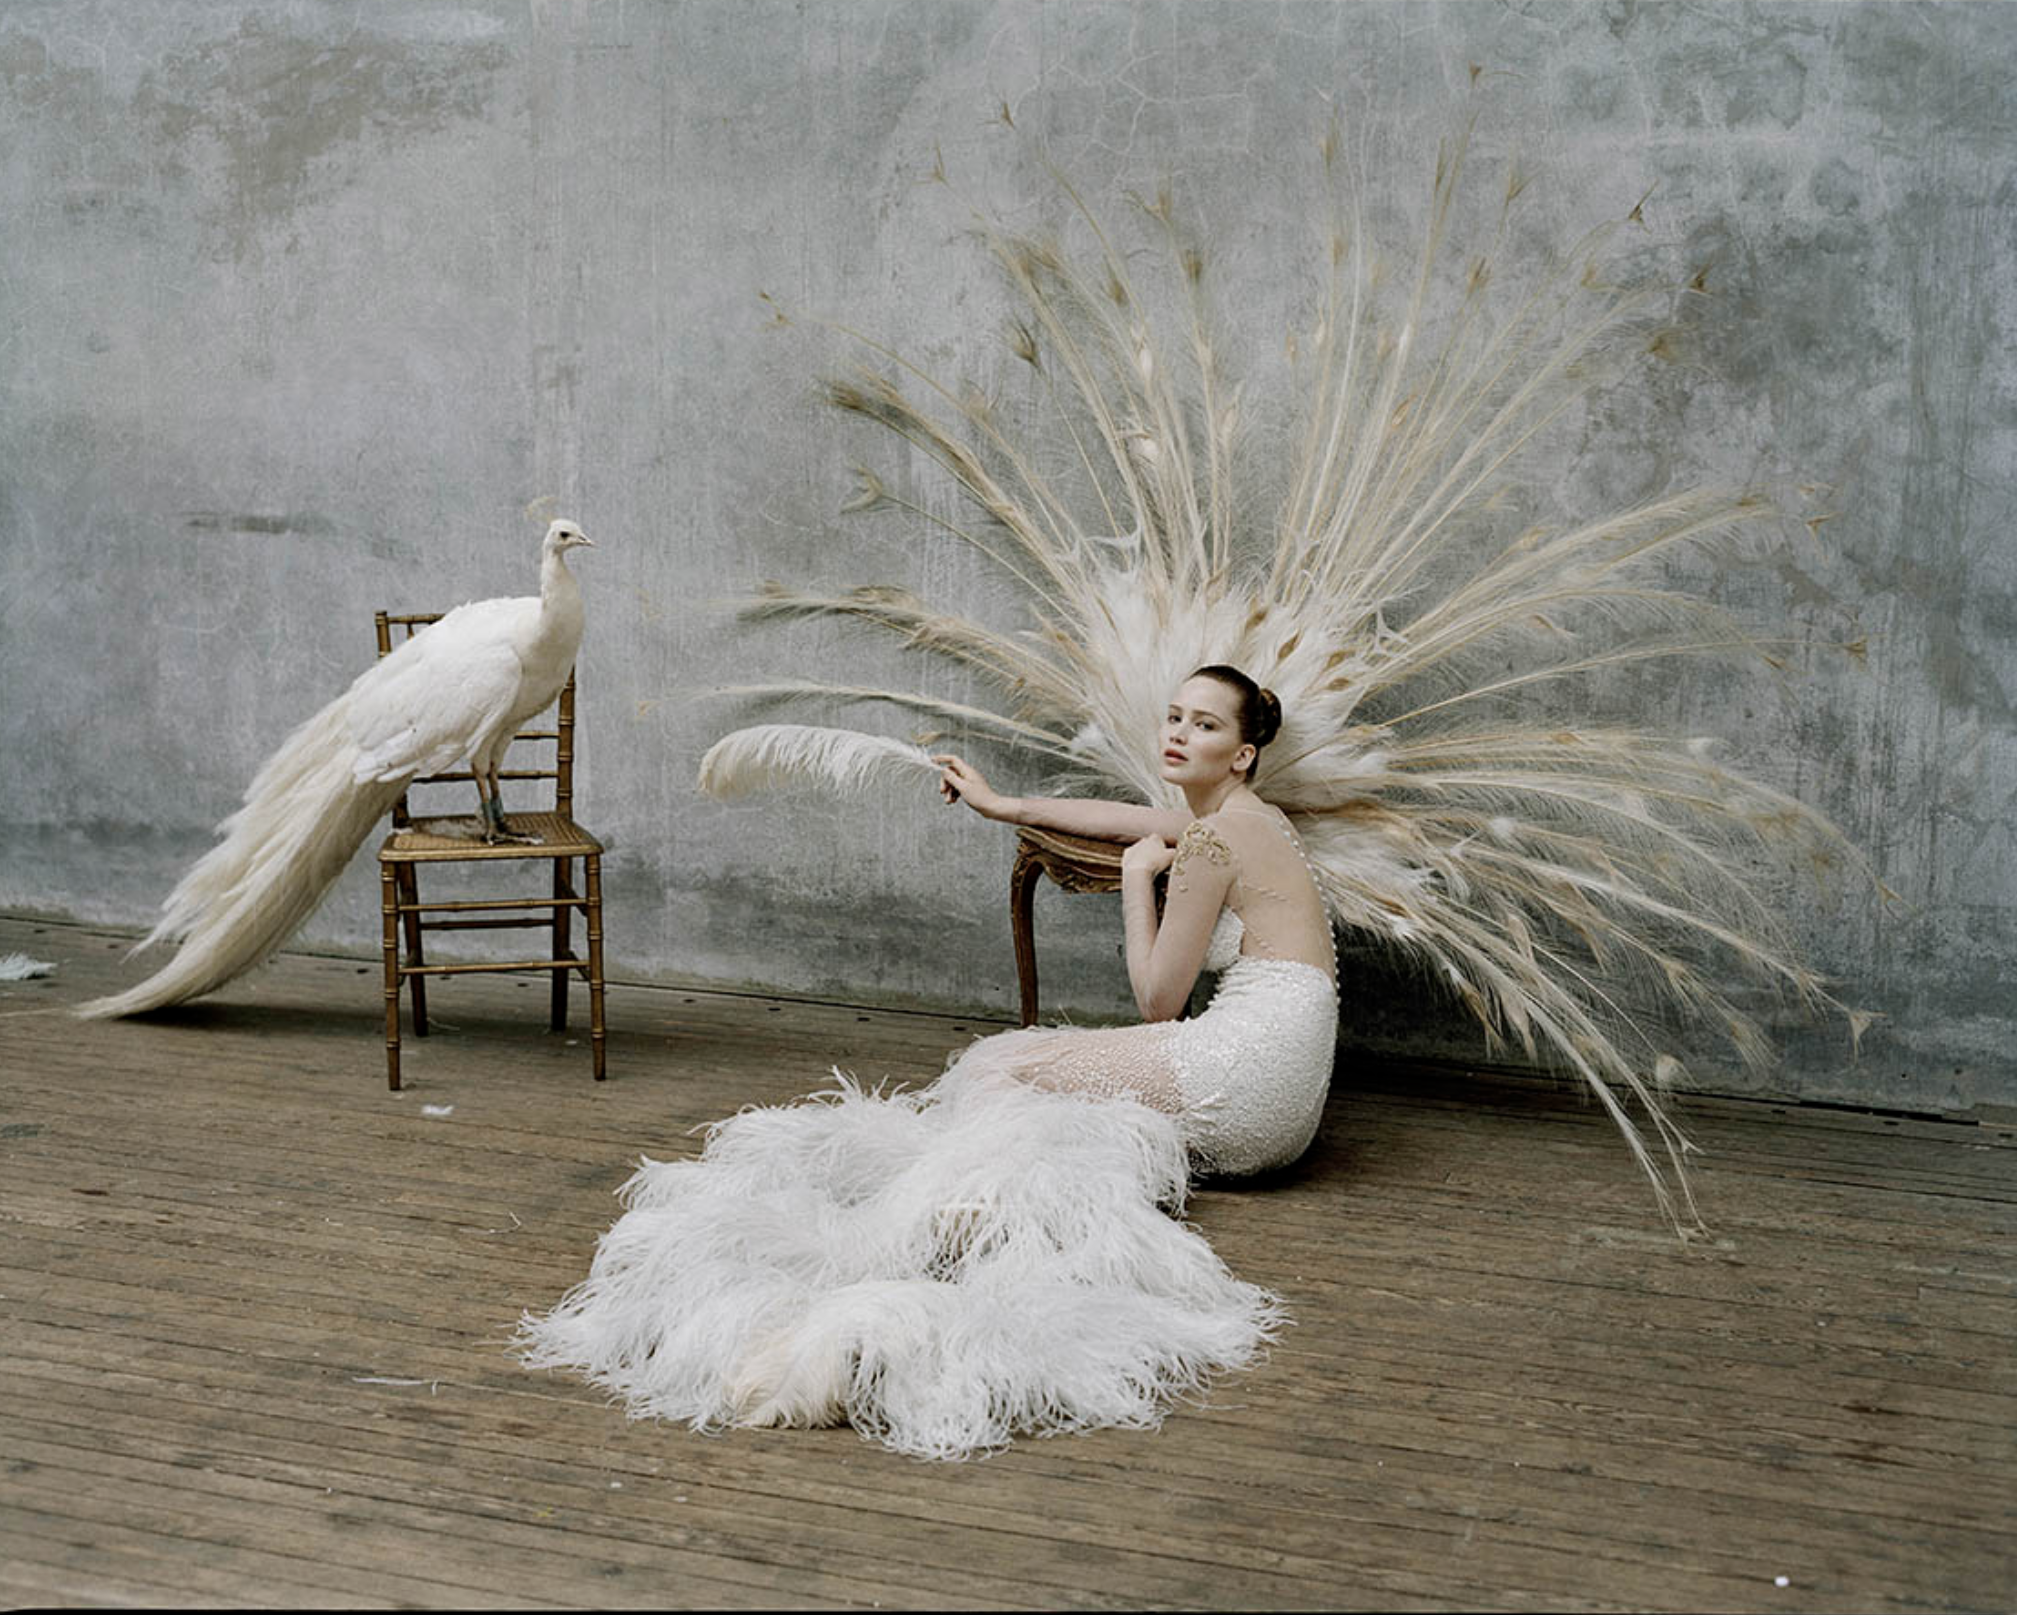 Woman sitting on the floor dressed in a white ballgown, next to a white peacock